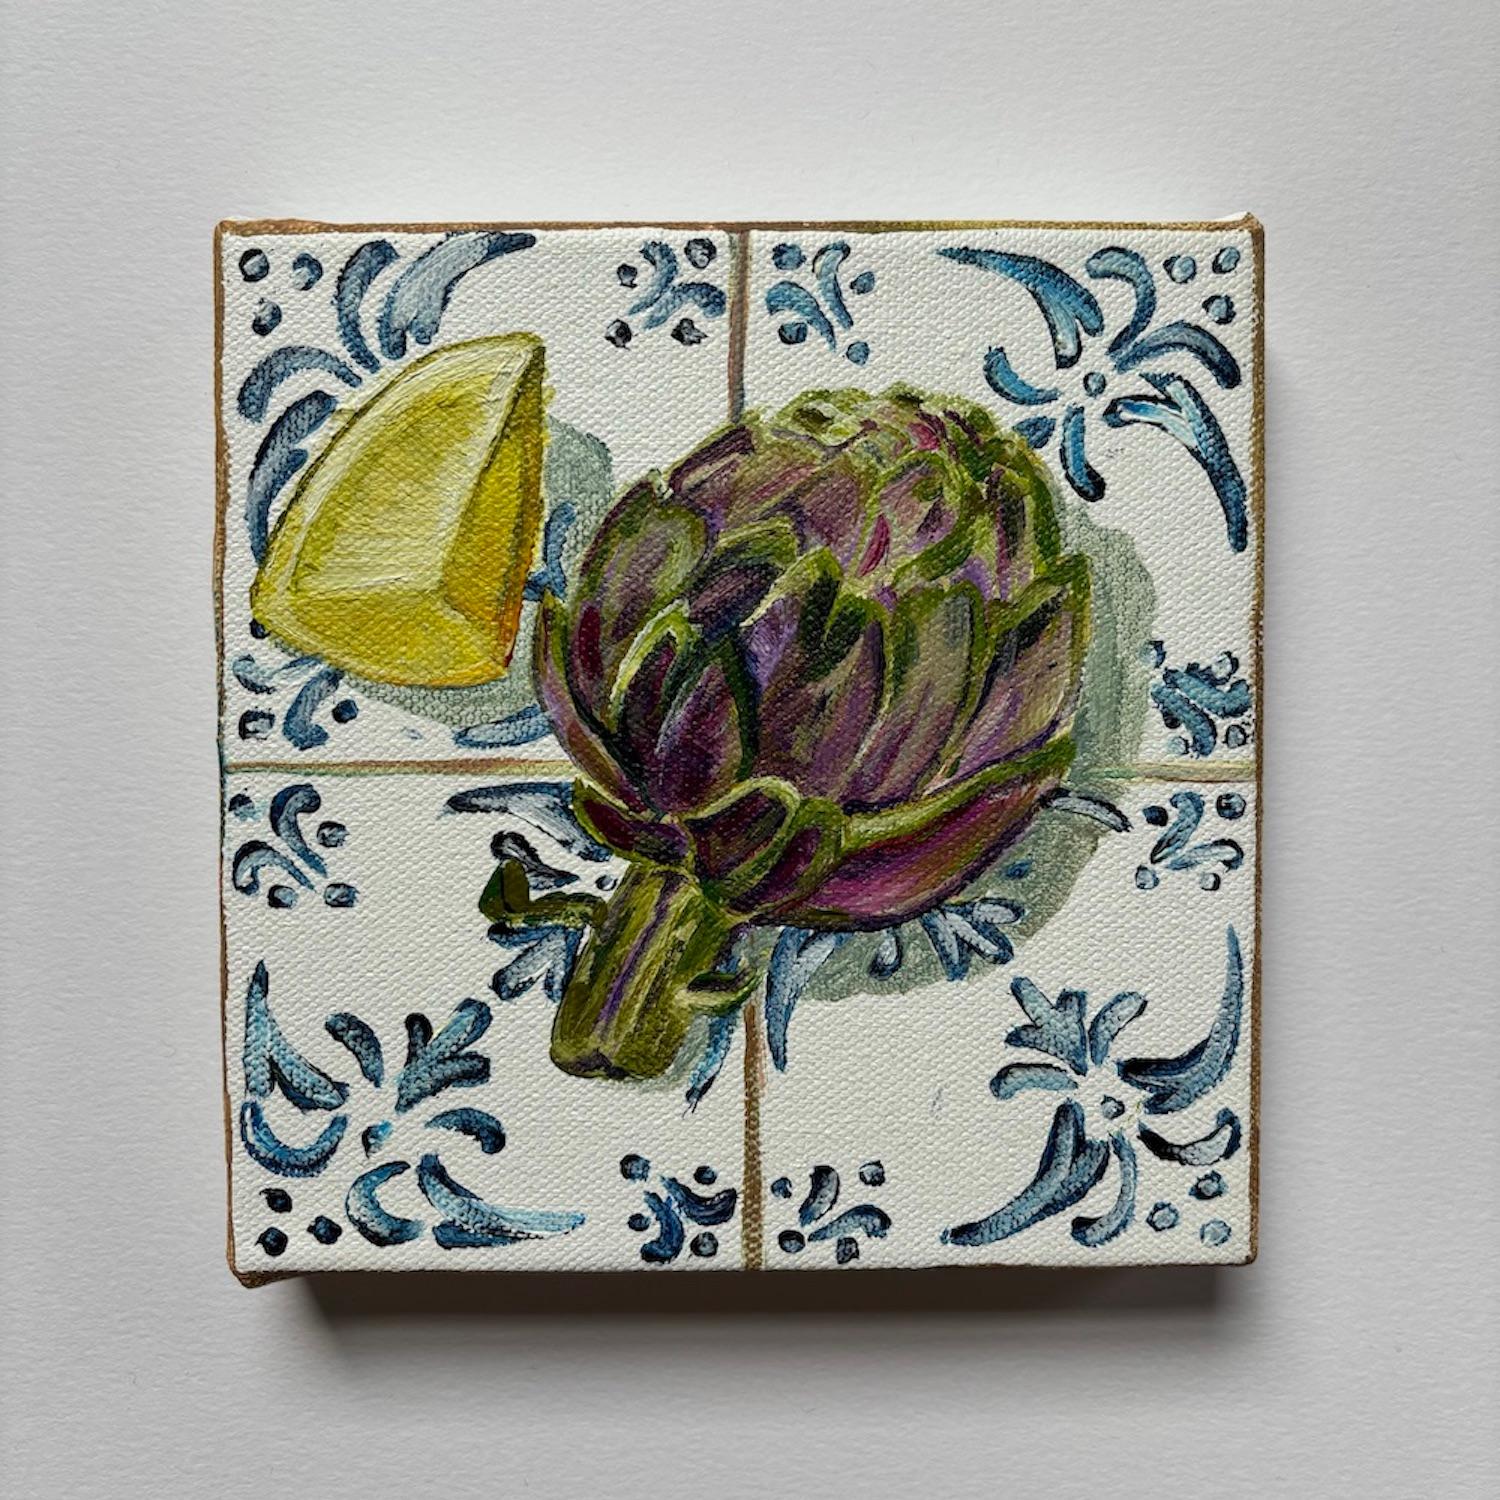  Artichoke & Lemon, Original painting, Food art, Seafood, Mediterranean style - Contemporary Painting by Pippa Smith